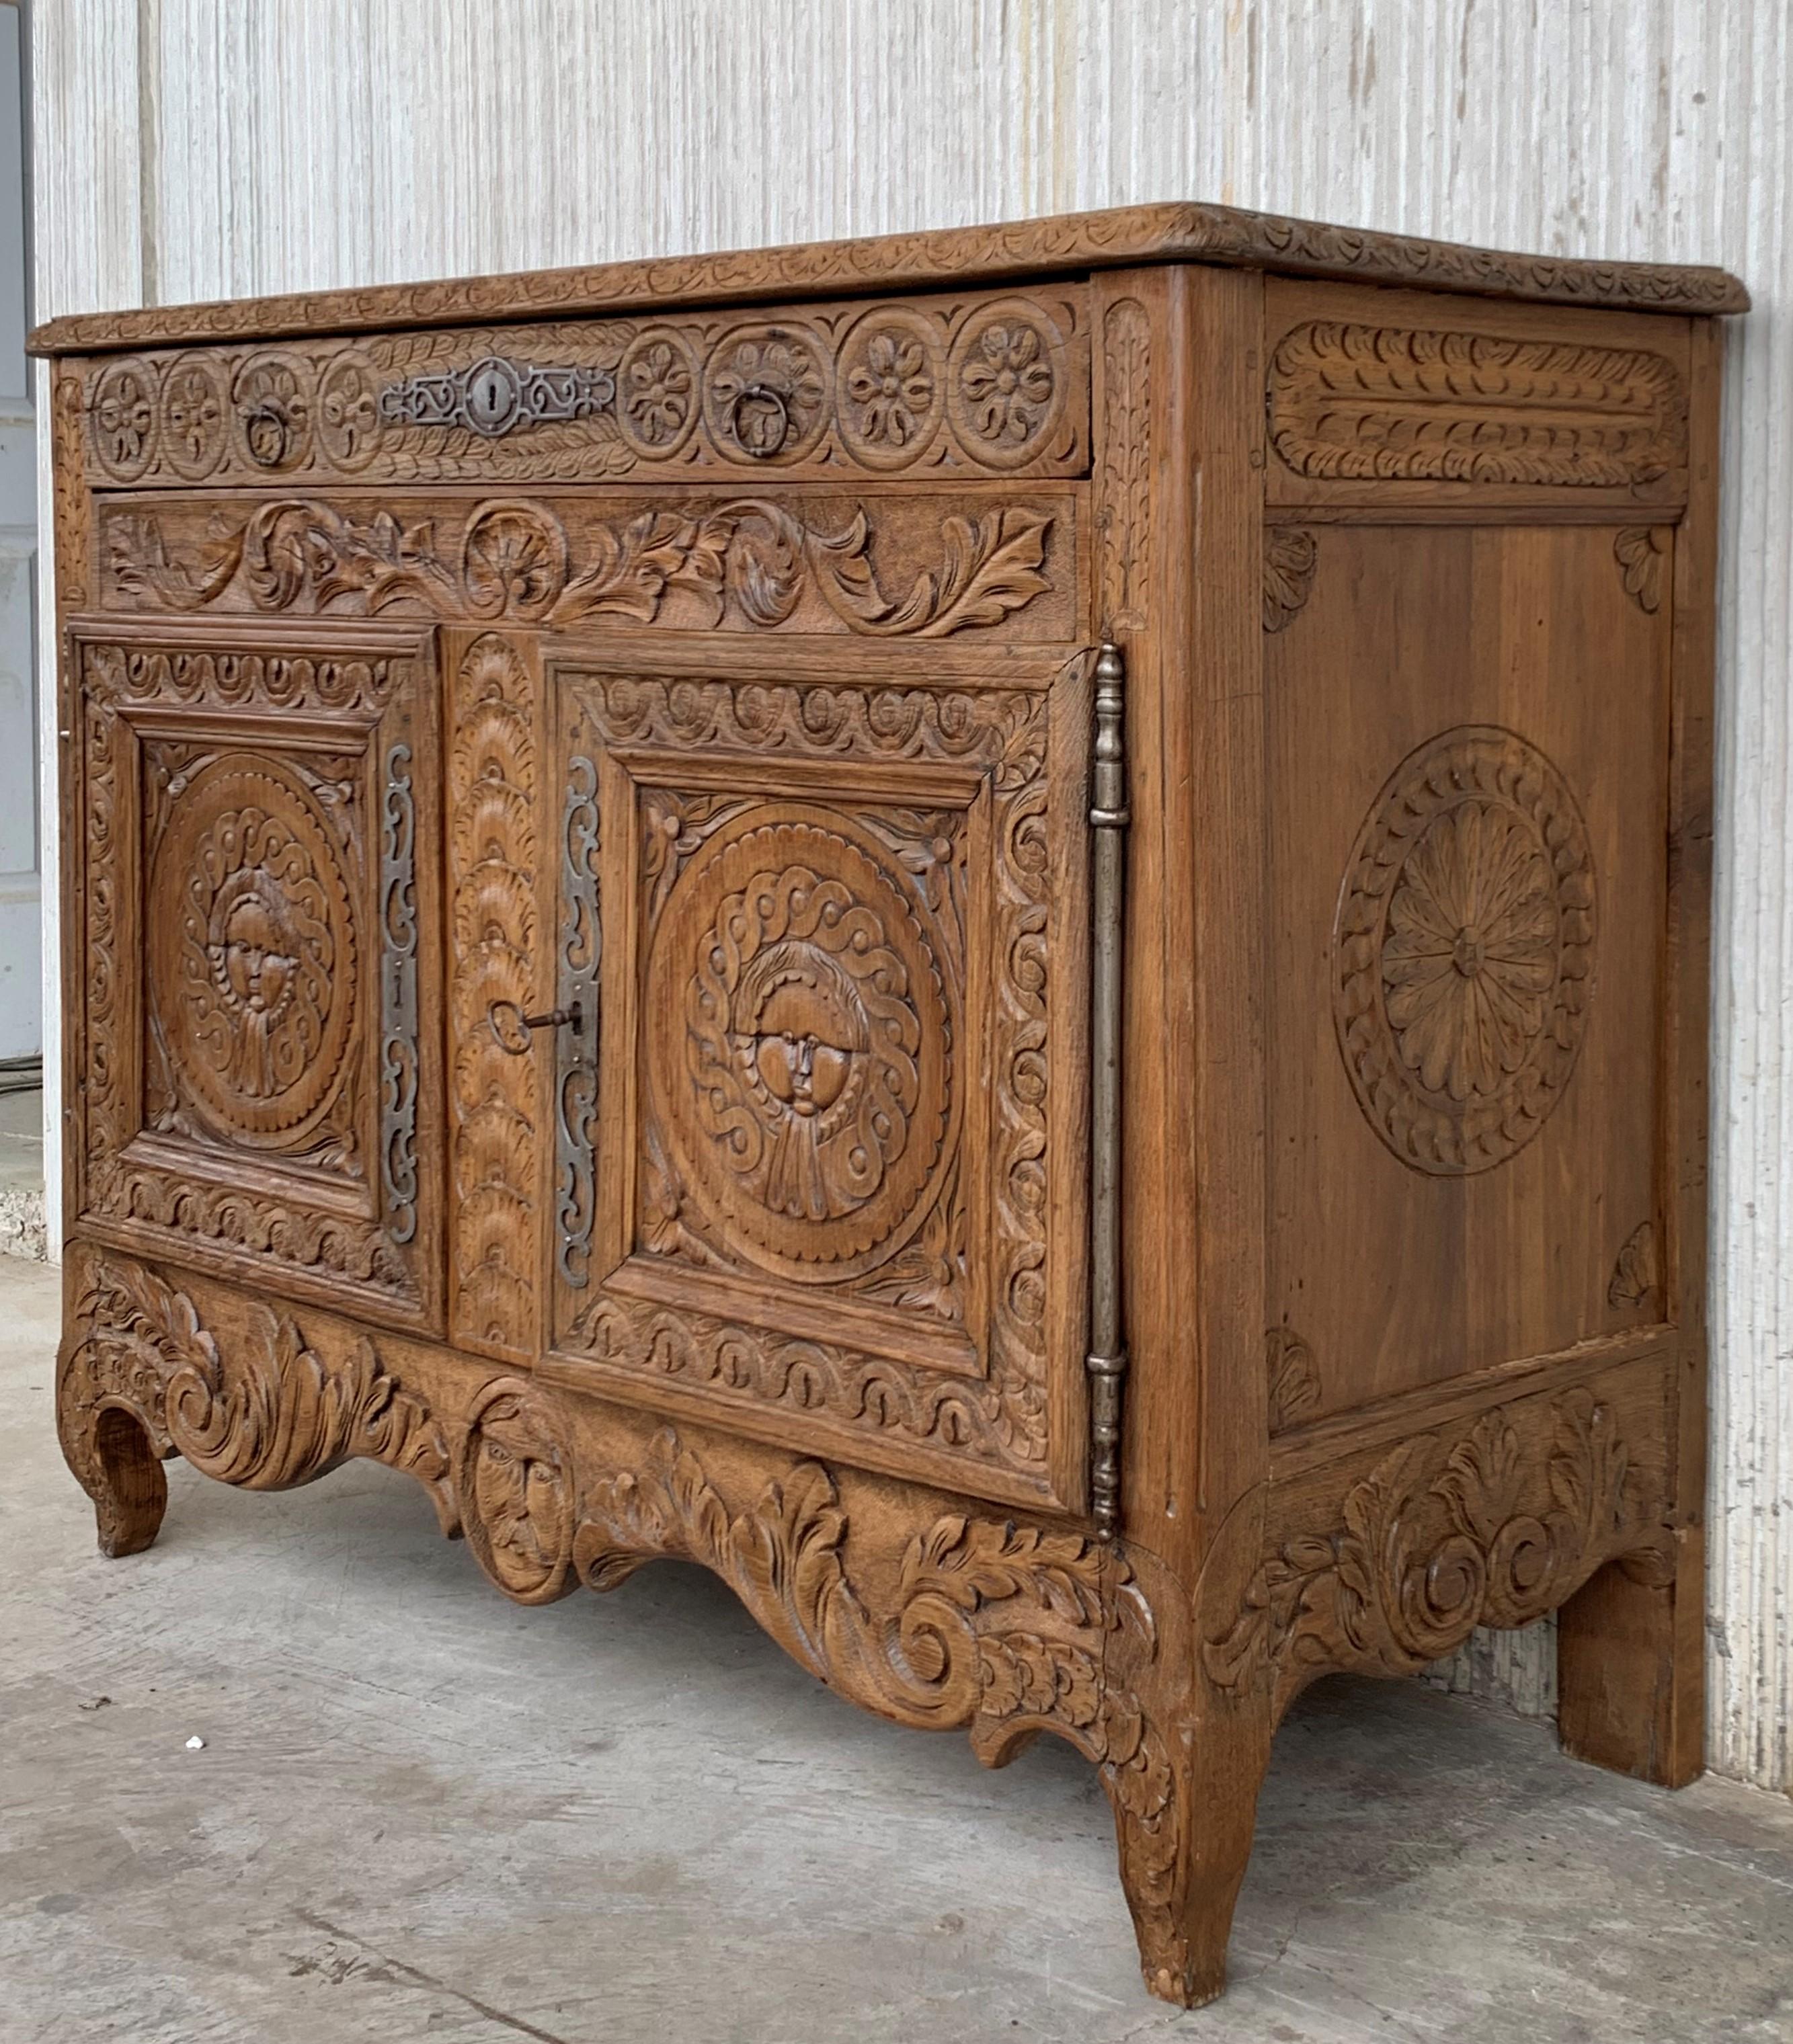 19th Century Catalan Spanish Hand Carved Baroque Oak Cabinet with Two Drawers and Two Doors